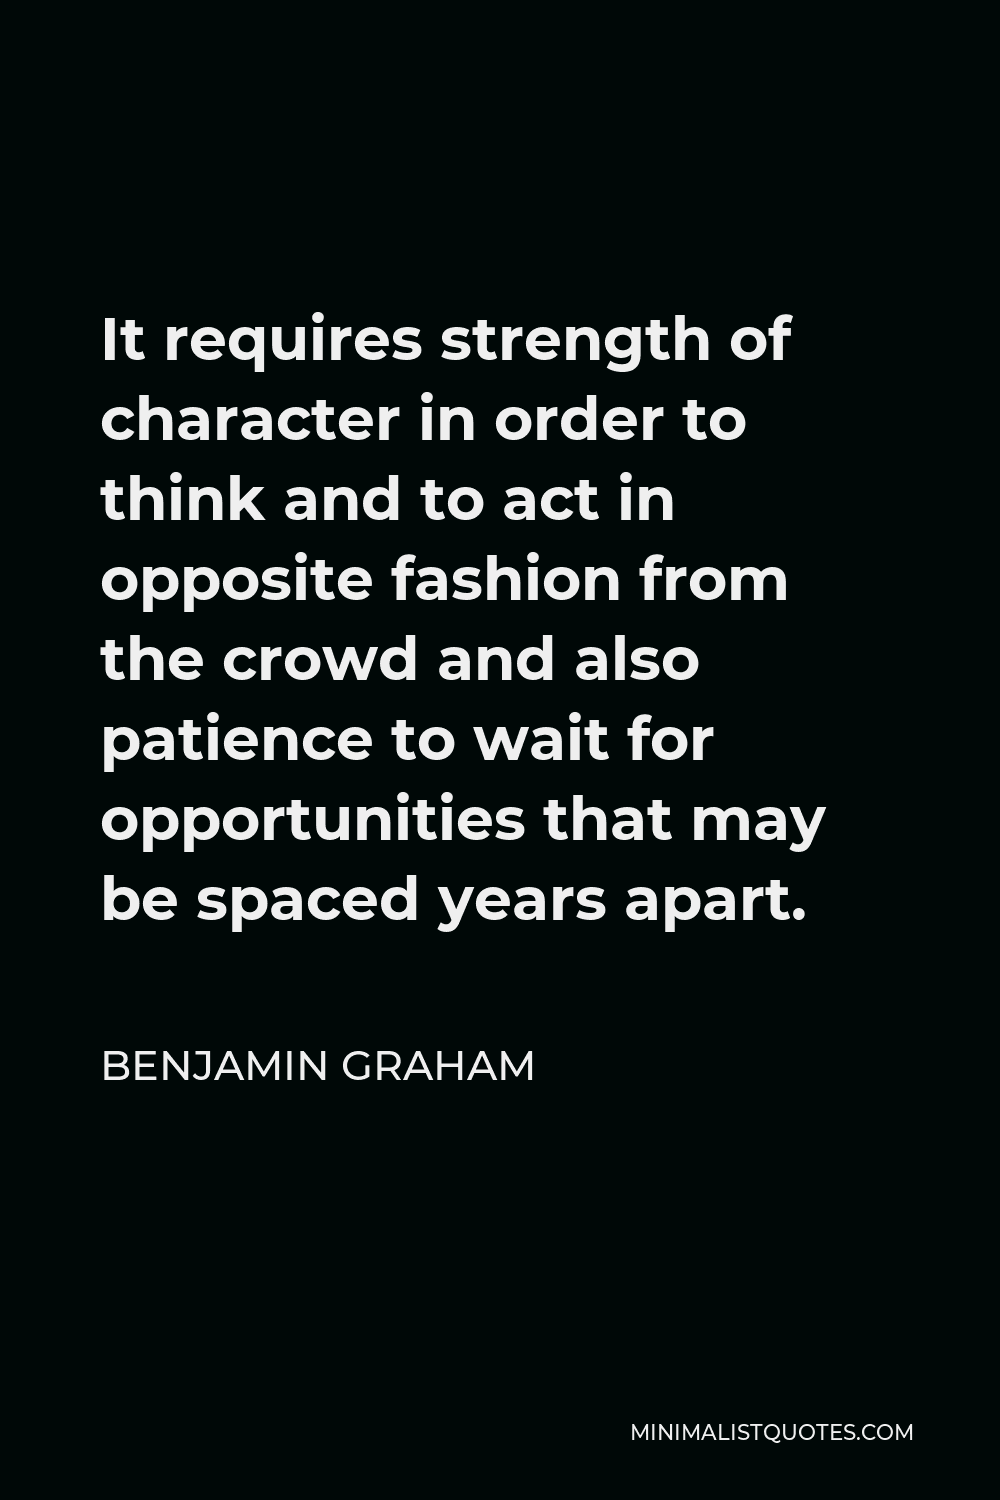 Benjamin Graham Quote - It requires strength of character in order to think and to act in opposite fashion from the crowd and also patience to wait for opportunities that may be spaced years apart.